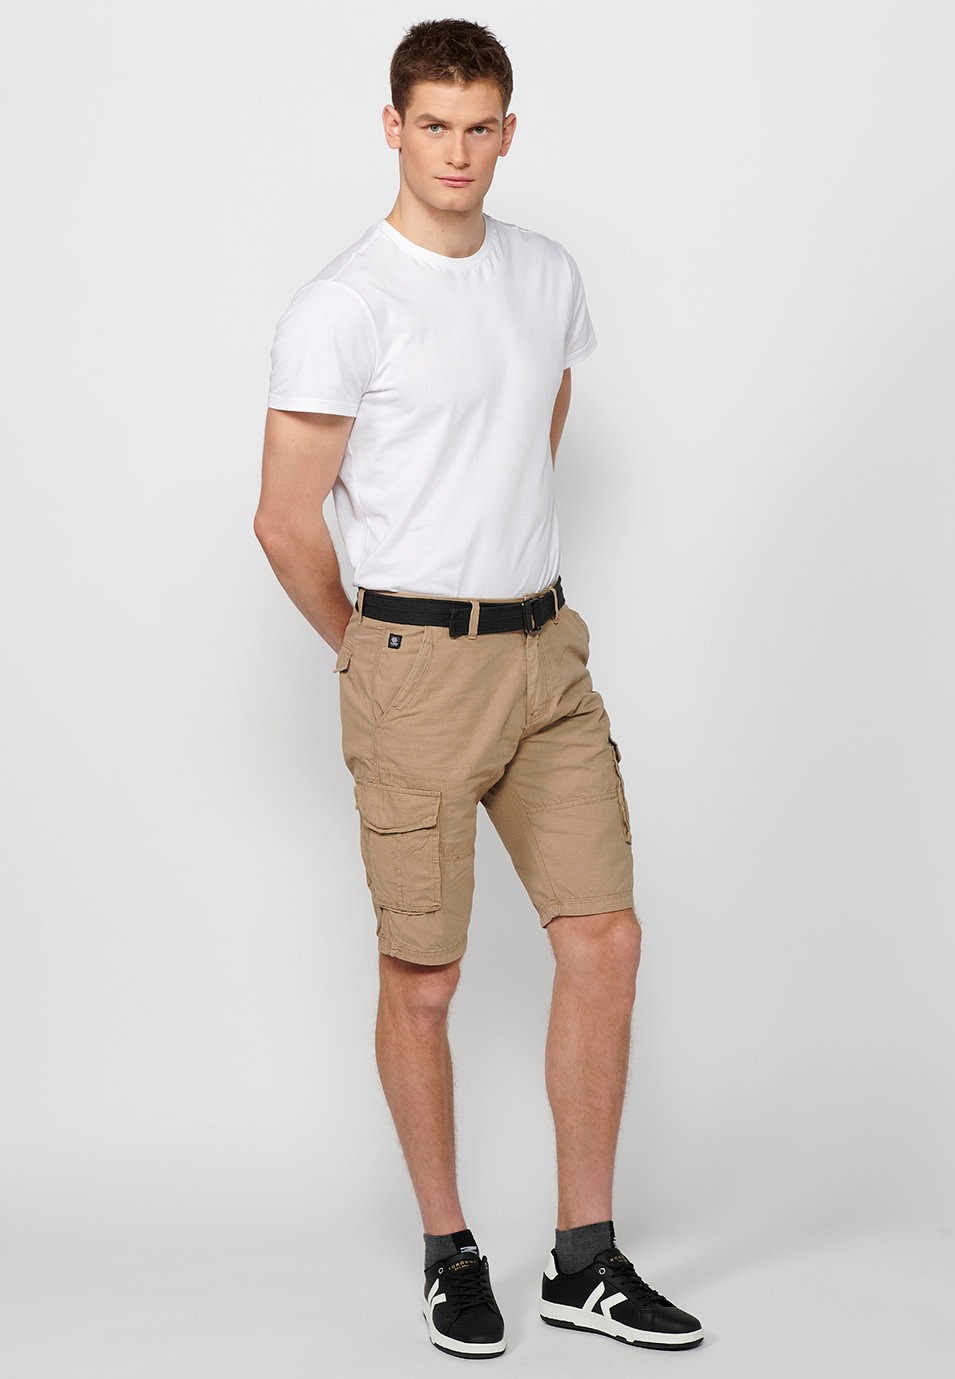 Cotton cargo shorts with belt and front closure with zipper and button with pockets, two back pockets with flap and two cargo pants in Beige Color for Men